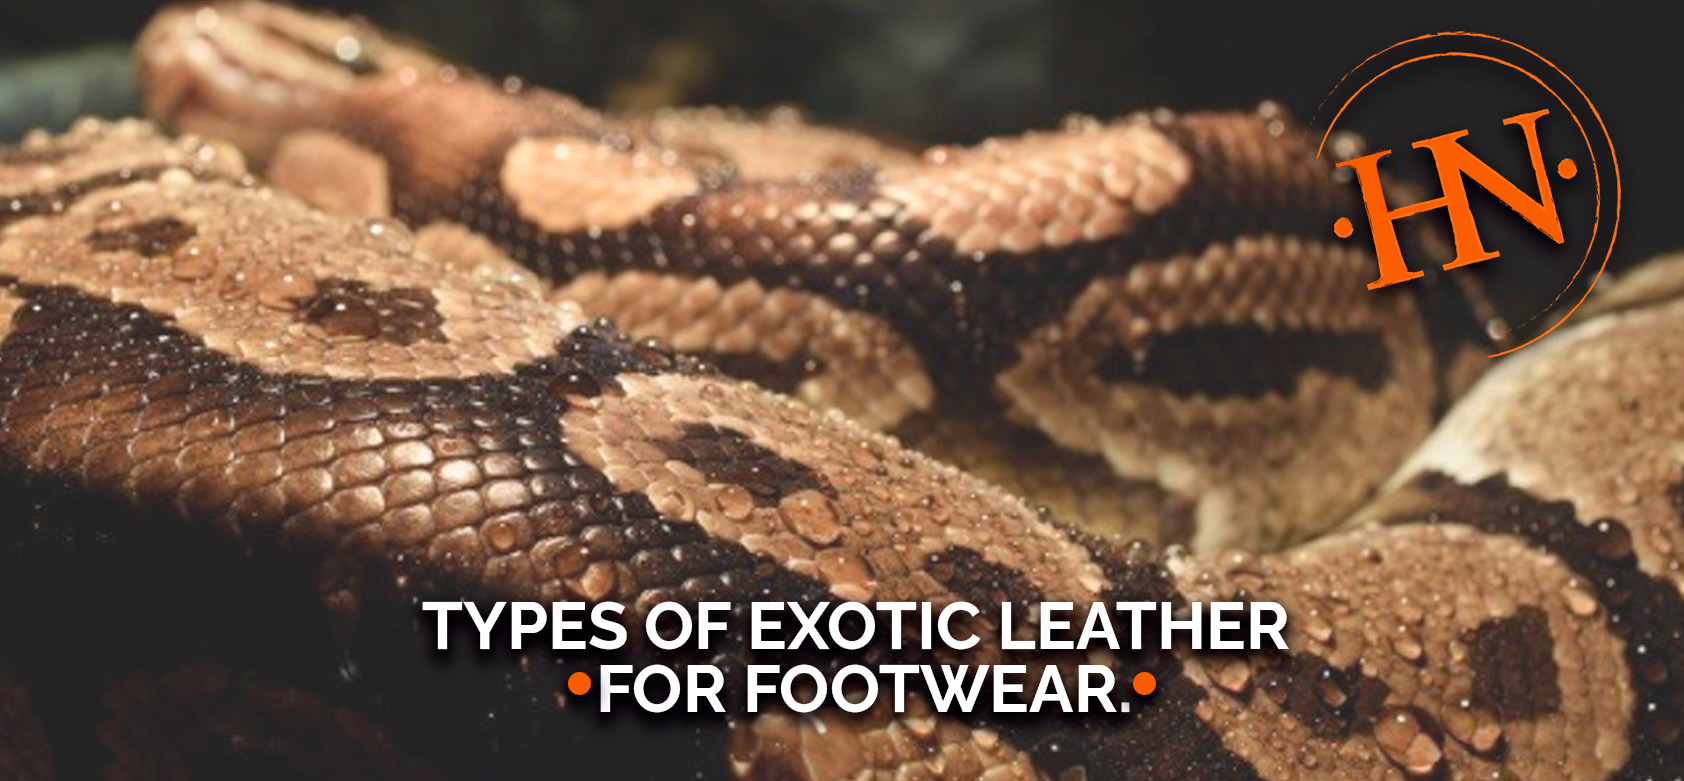 What Is Exotic Leather?